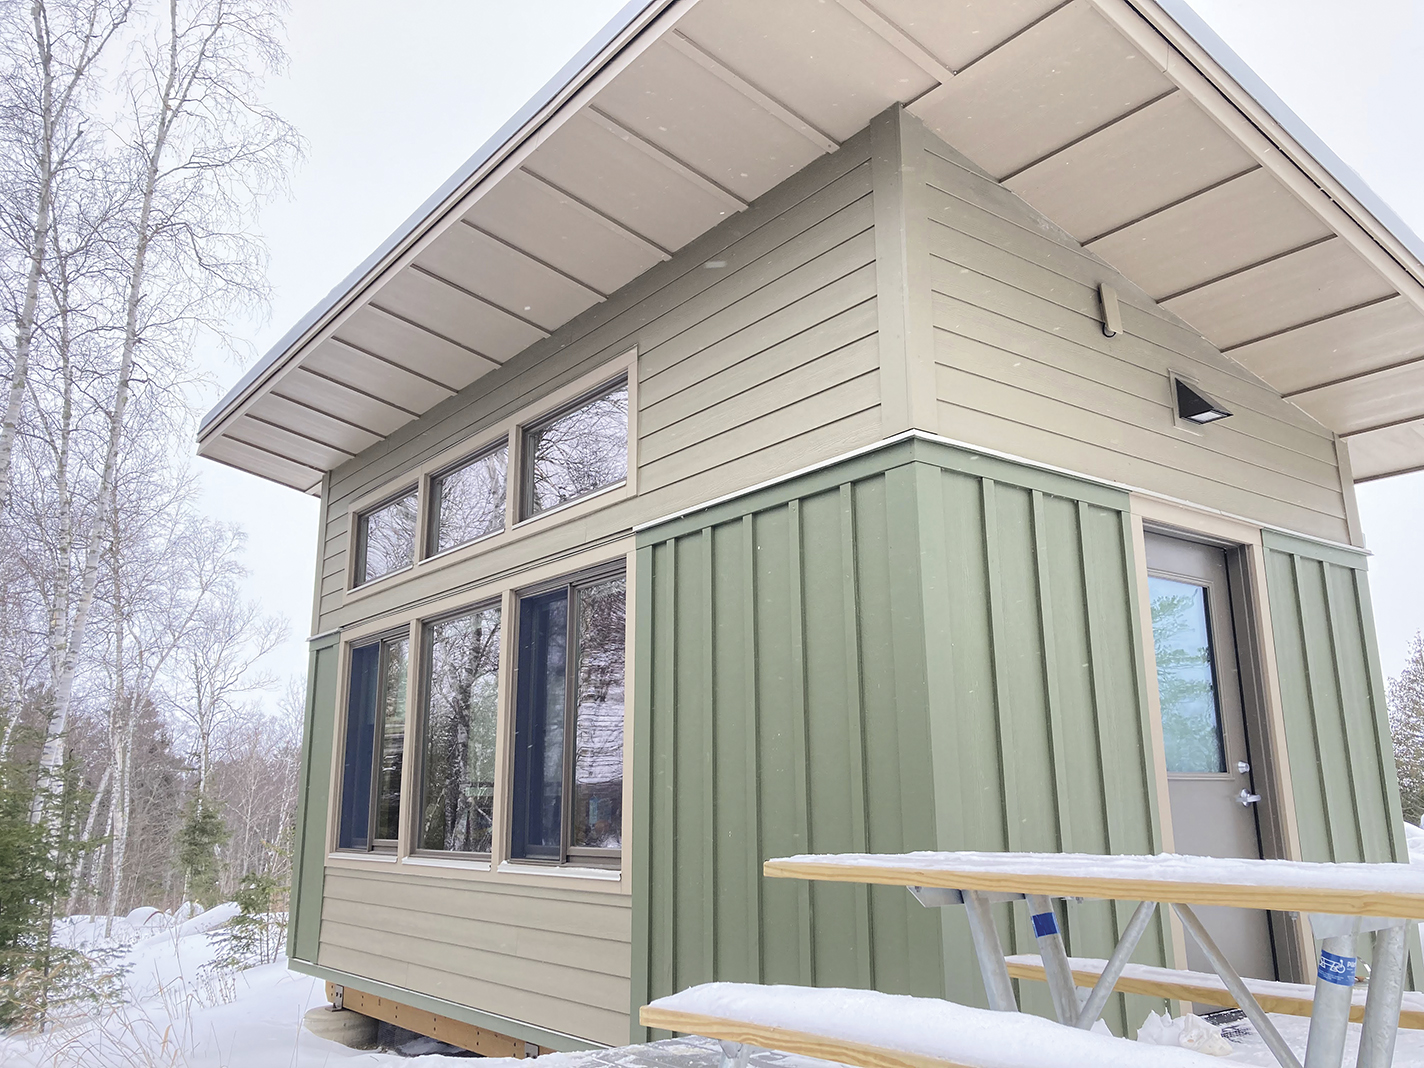 Modern cabin construction ensures having a warm retreat after forays onto Lake Vermilion and the surrounding snowshoeing trails